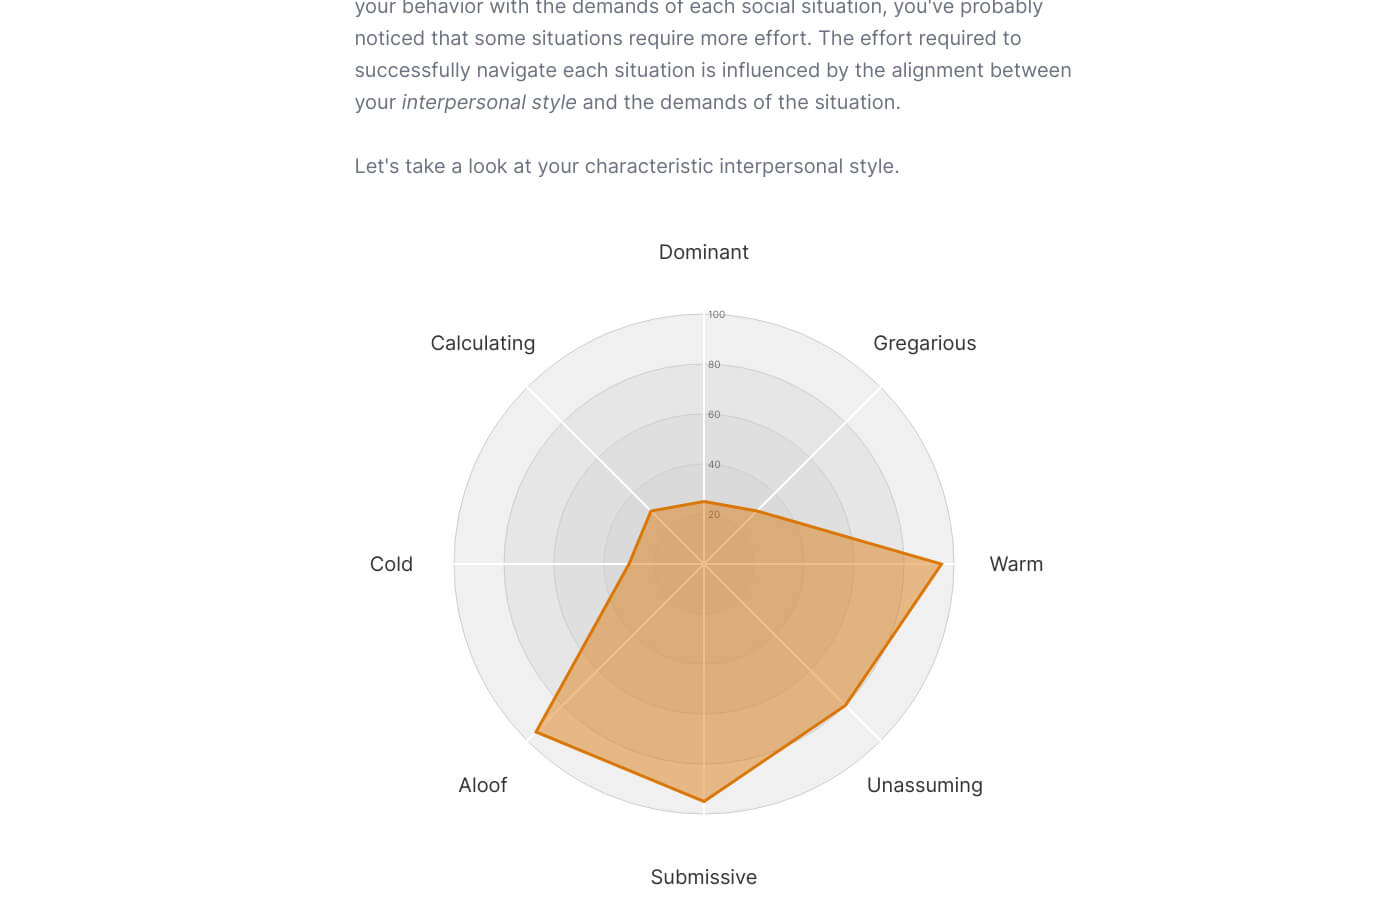 The interpersonal style analysis in TraitLab describes your social interaction patterns in more detail than the DiSC profile types of dominance, influence, steadiness, and conscientiousness.